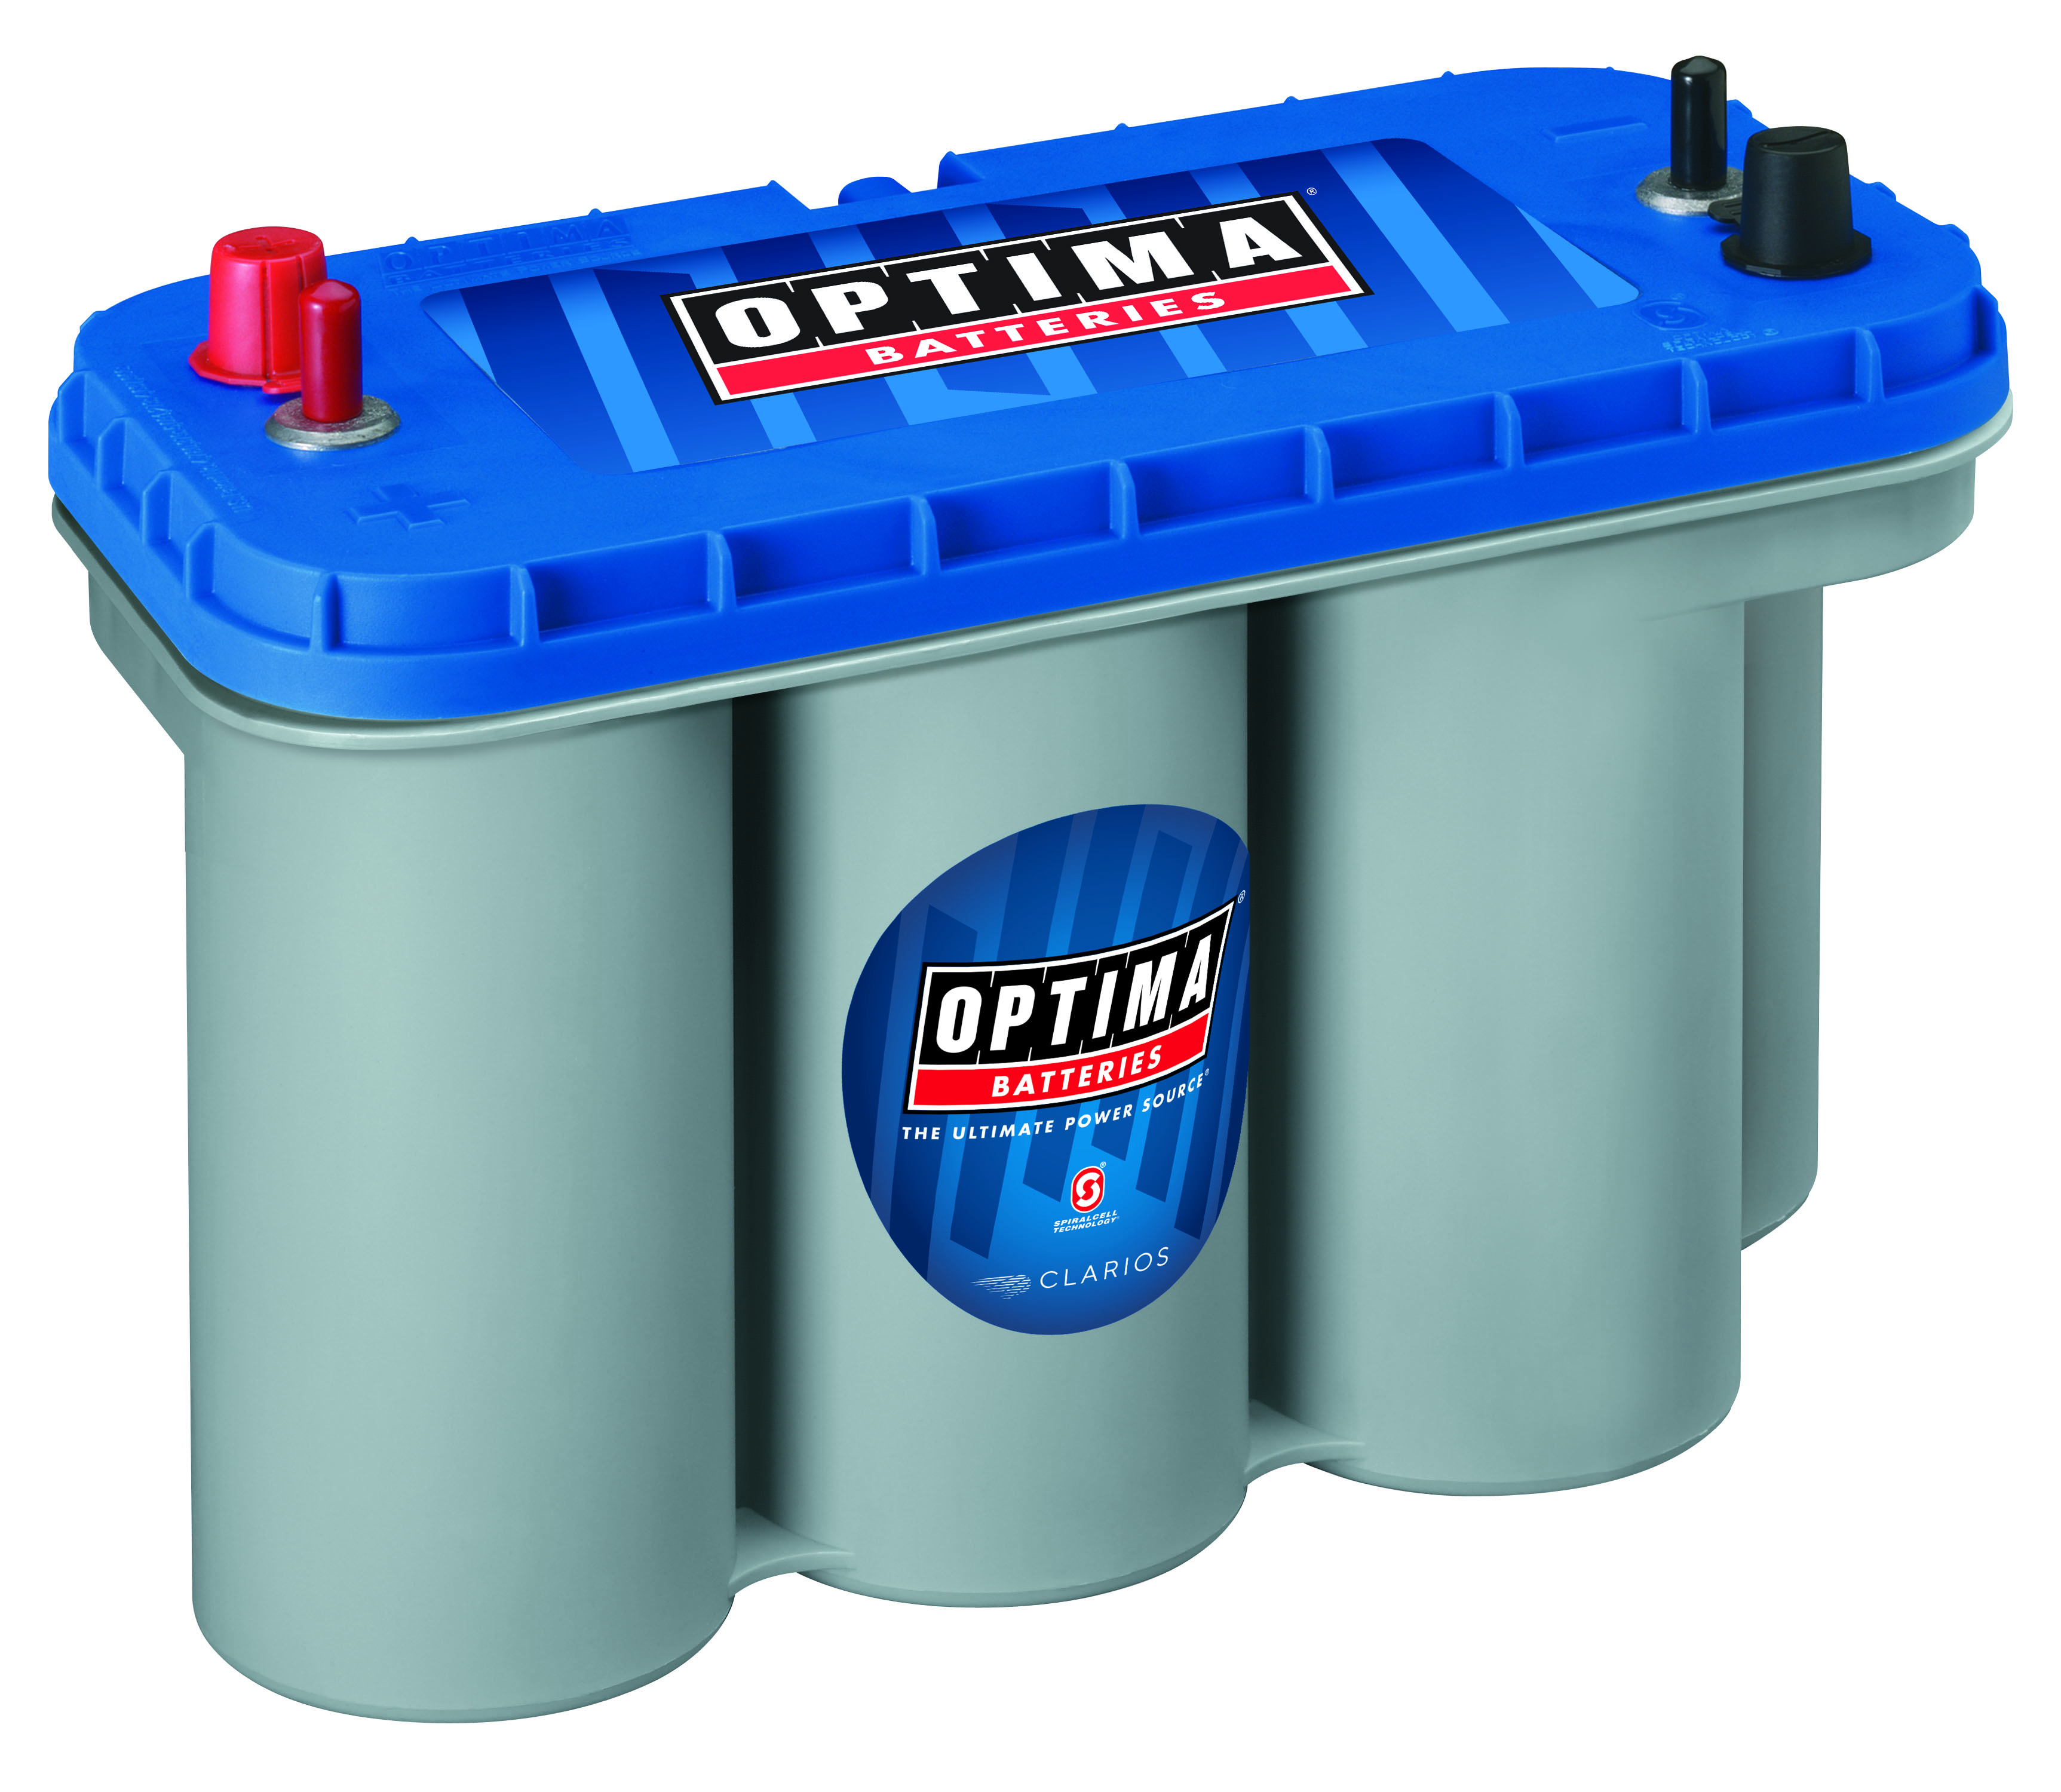 OPTIMA BlueTop AGM Spiralcell Marine Battery, Group Size 31, 12 Volt 900 CCA - image 1 of 5